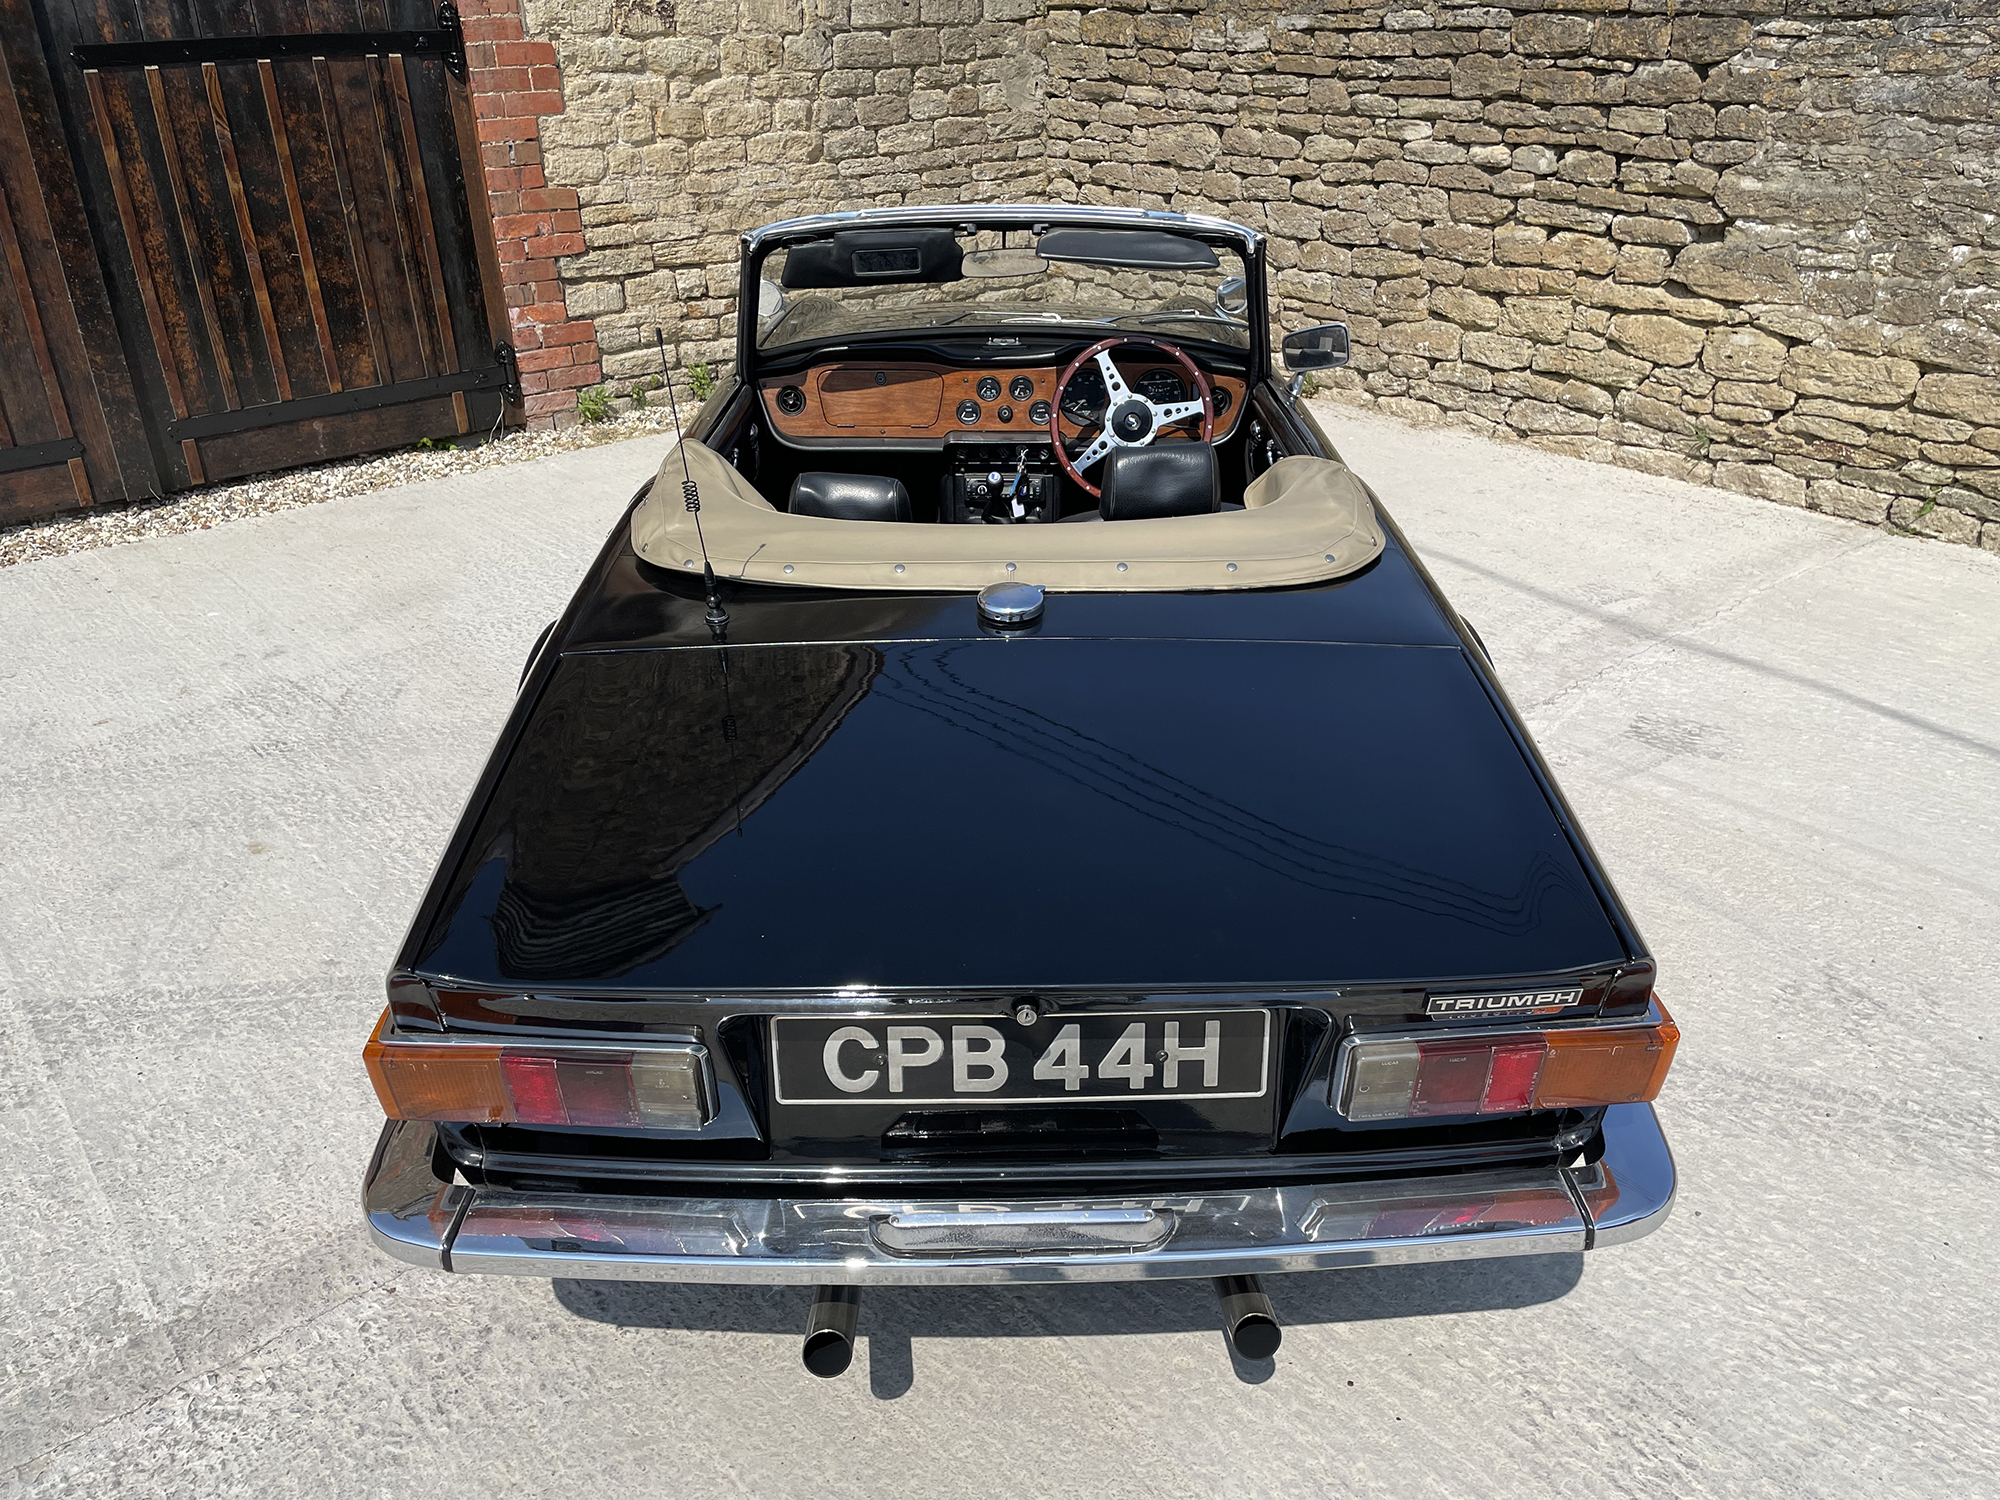 1970 Triumph TR6 Reg. no. CPB 44H Chassis no. CP513450 Engine no. CP25693HE - Image 7 of 21